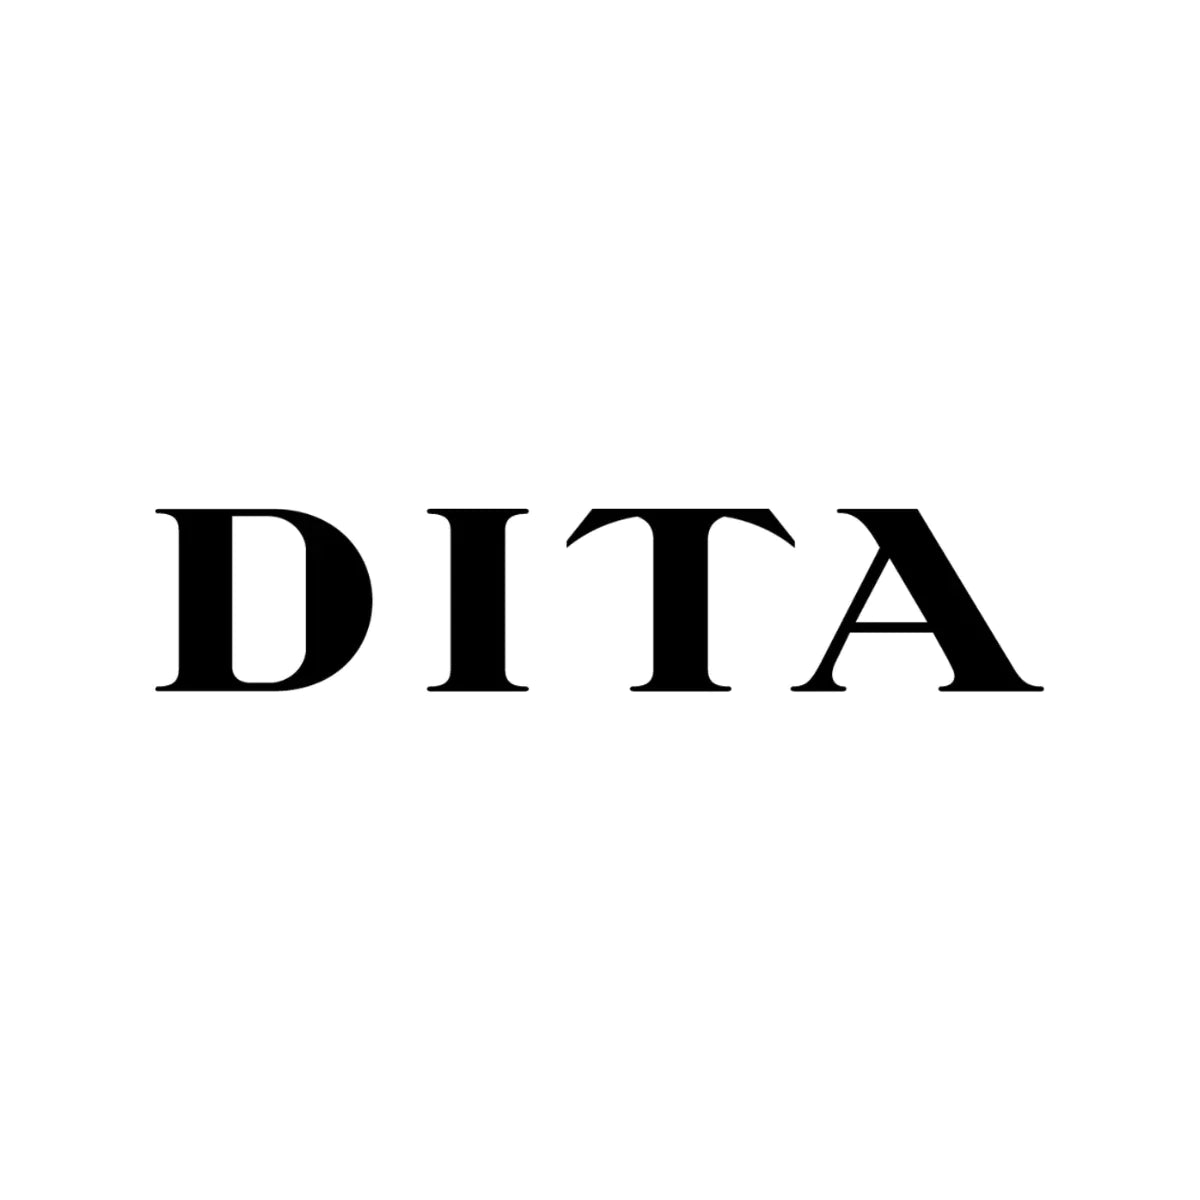 "Explore an elegant collection of Dita eyewear for both men and women at Optorium, featuring stylish frames, sunglasses, and opticals. Enjoy the best prices and free shipping on our finely crafted selection."